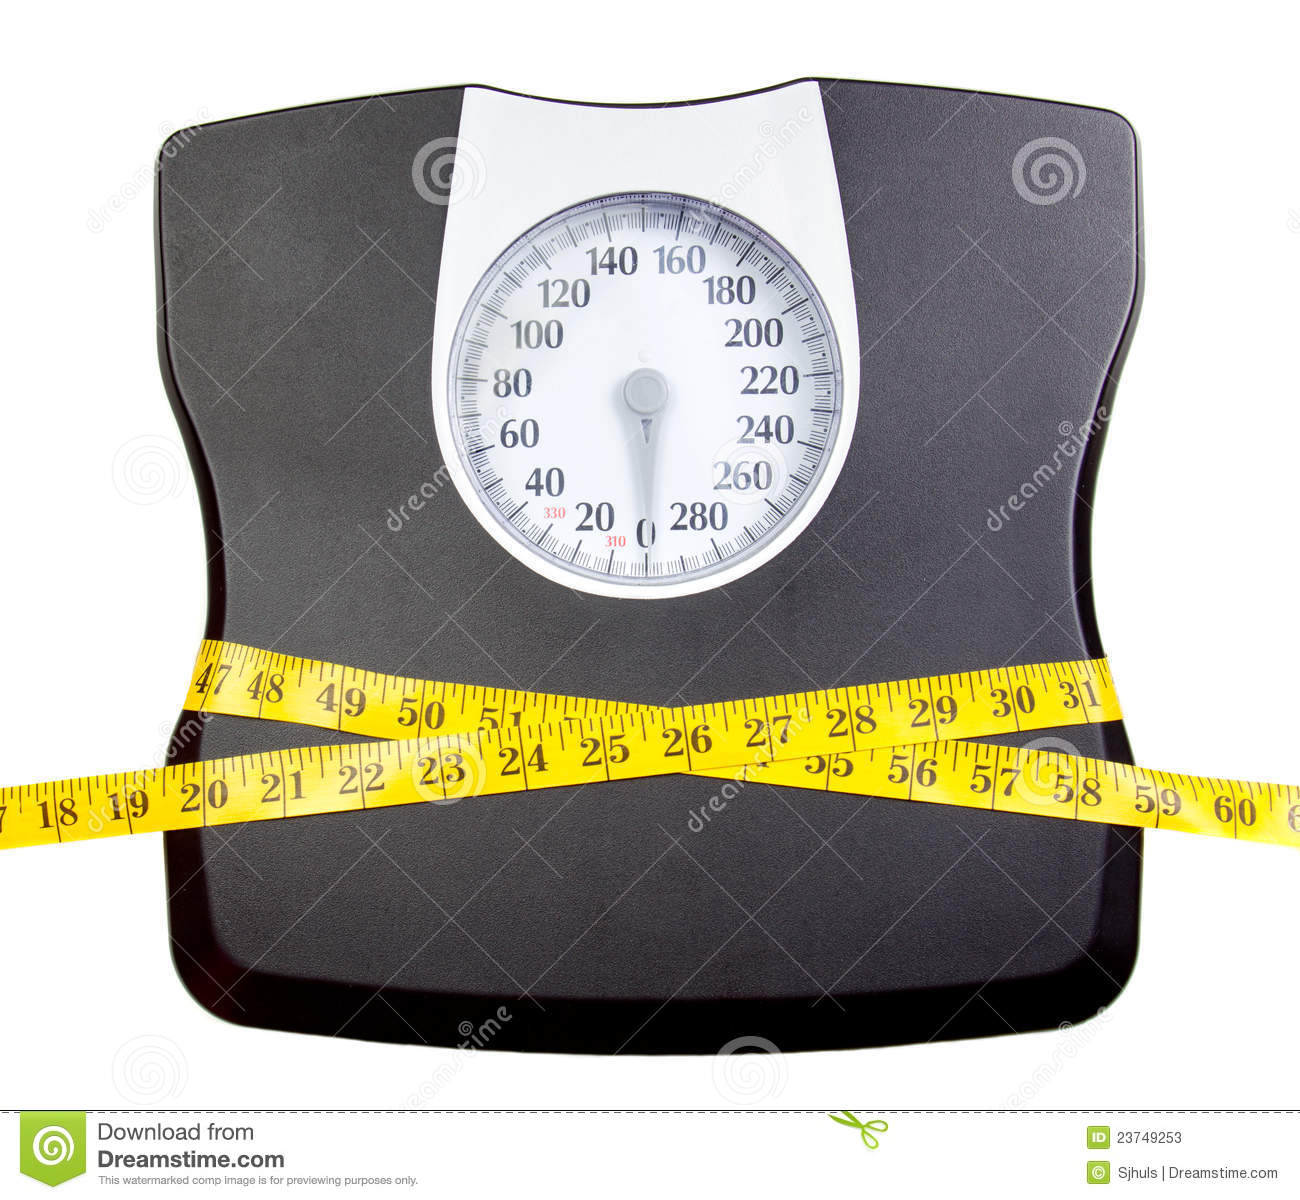 Bathroom Scale With A Measuring Tape Stock Photos   Image  23749253